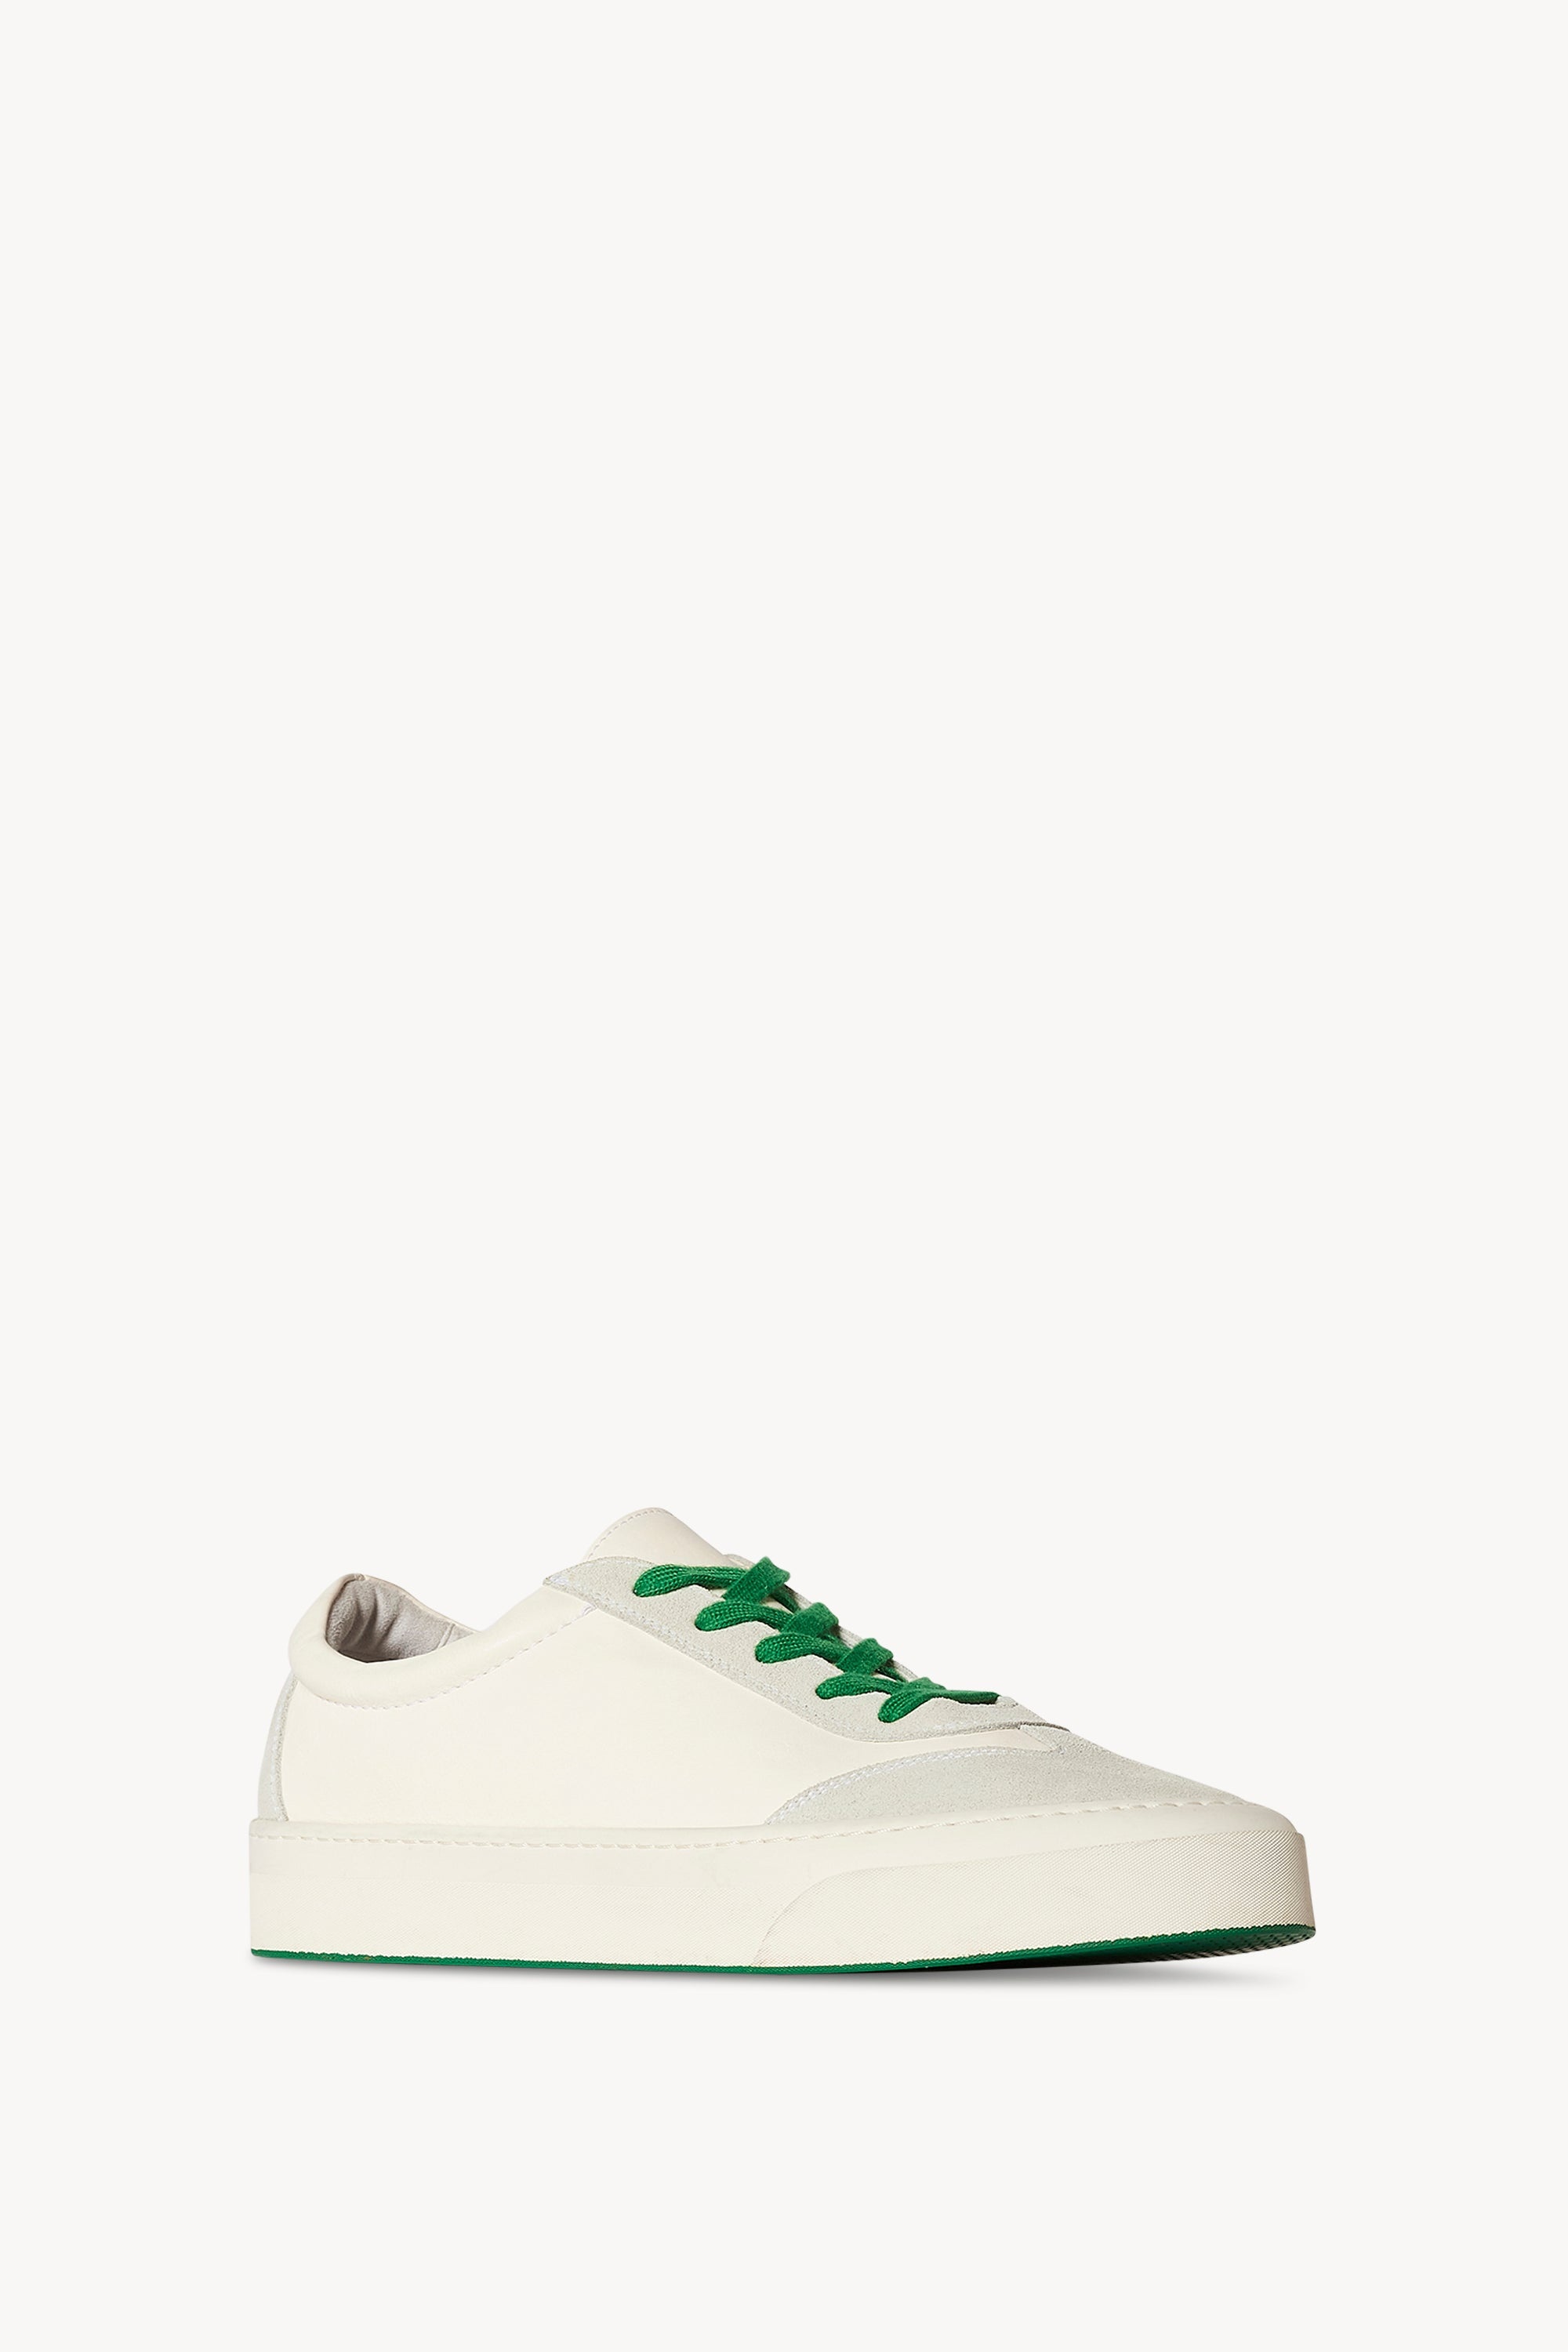 Marley Lace-Up Sneaker in Leather and Suede - 2